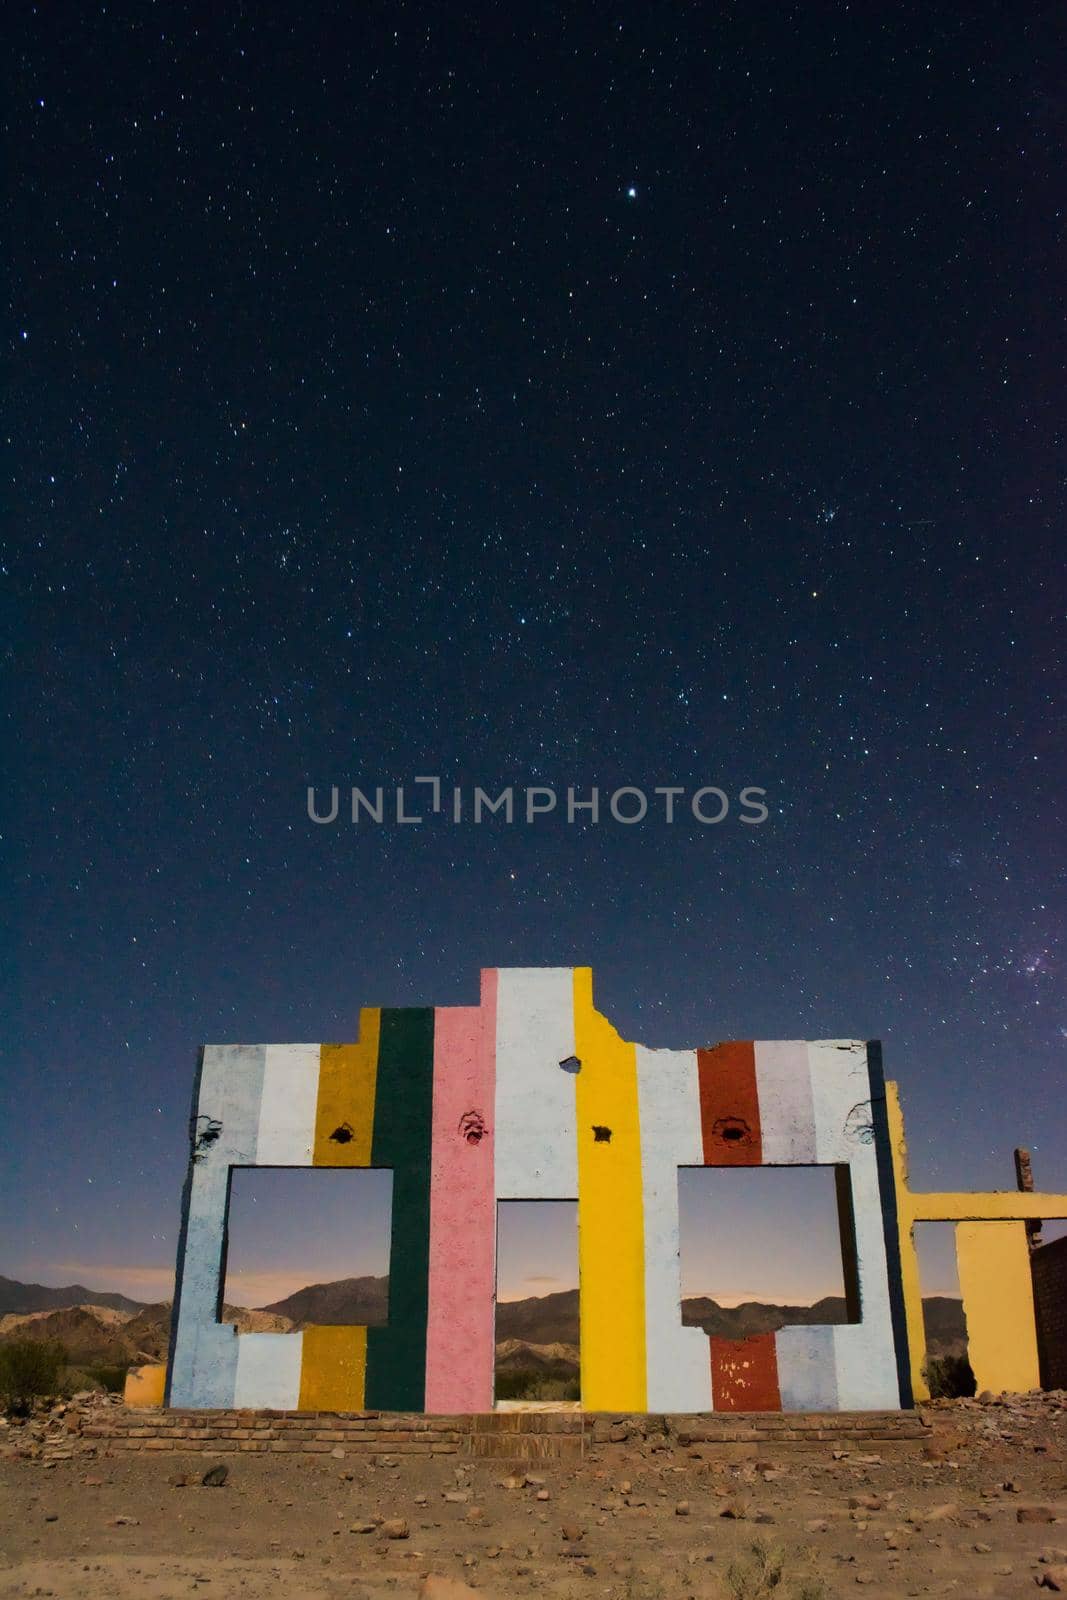 Starry night sky over a derelict house in the middle of the desert near Uspallata, Mendoza, Argentina. by hernan_hyper